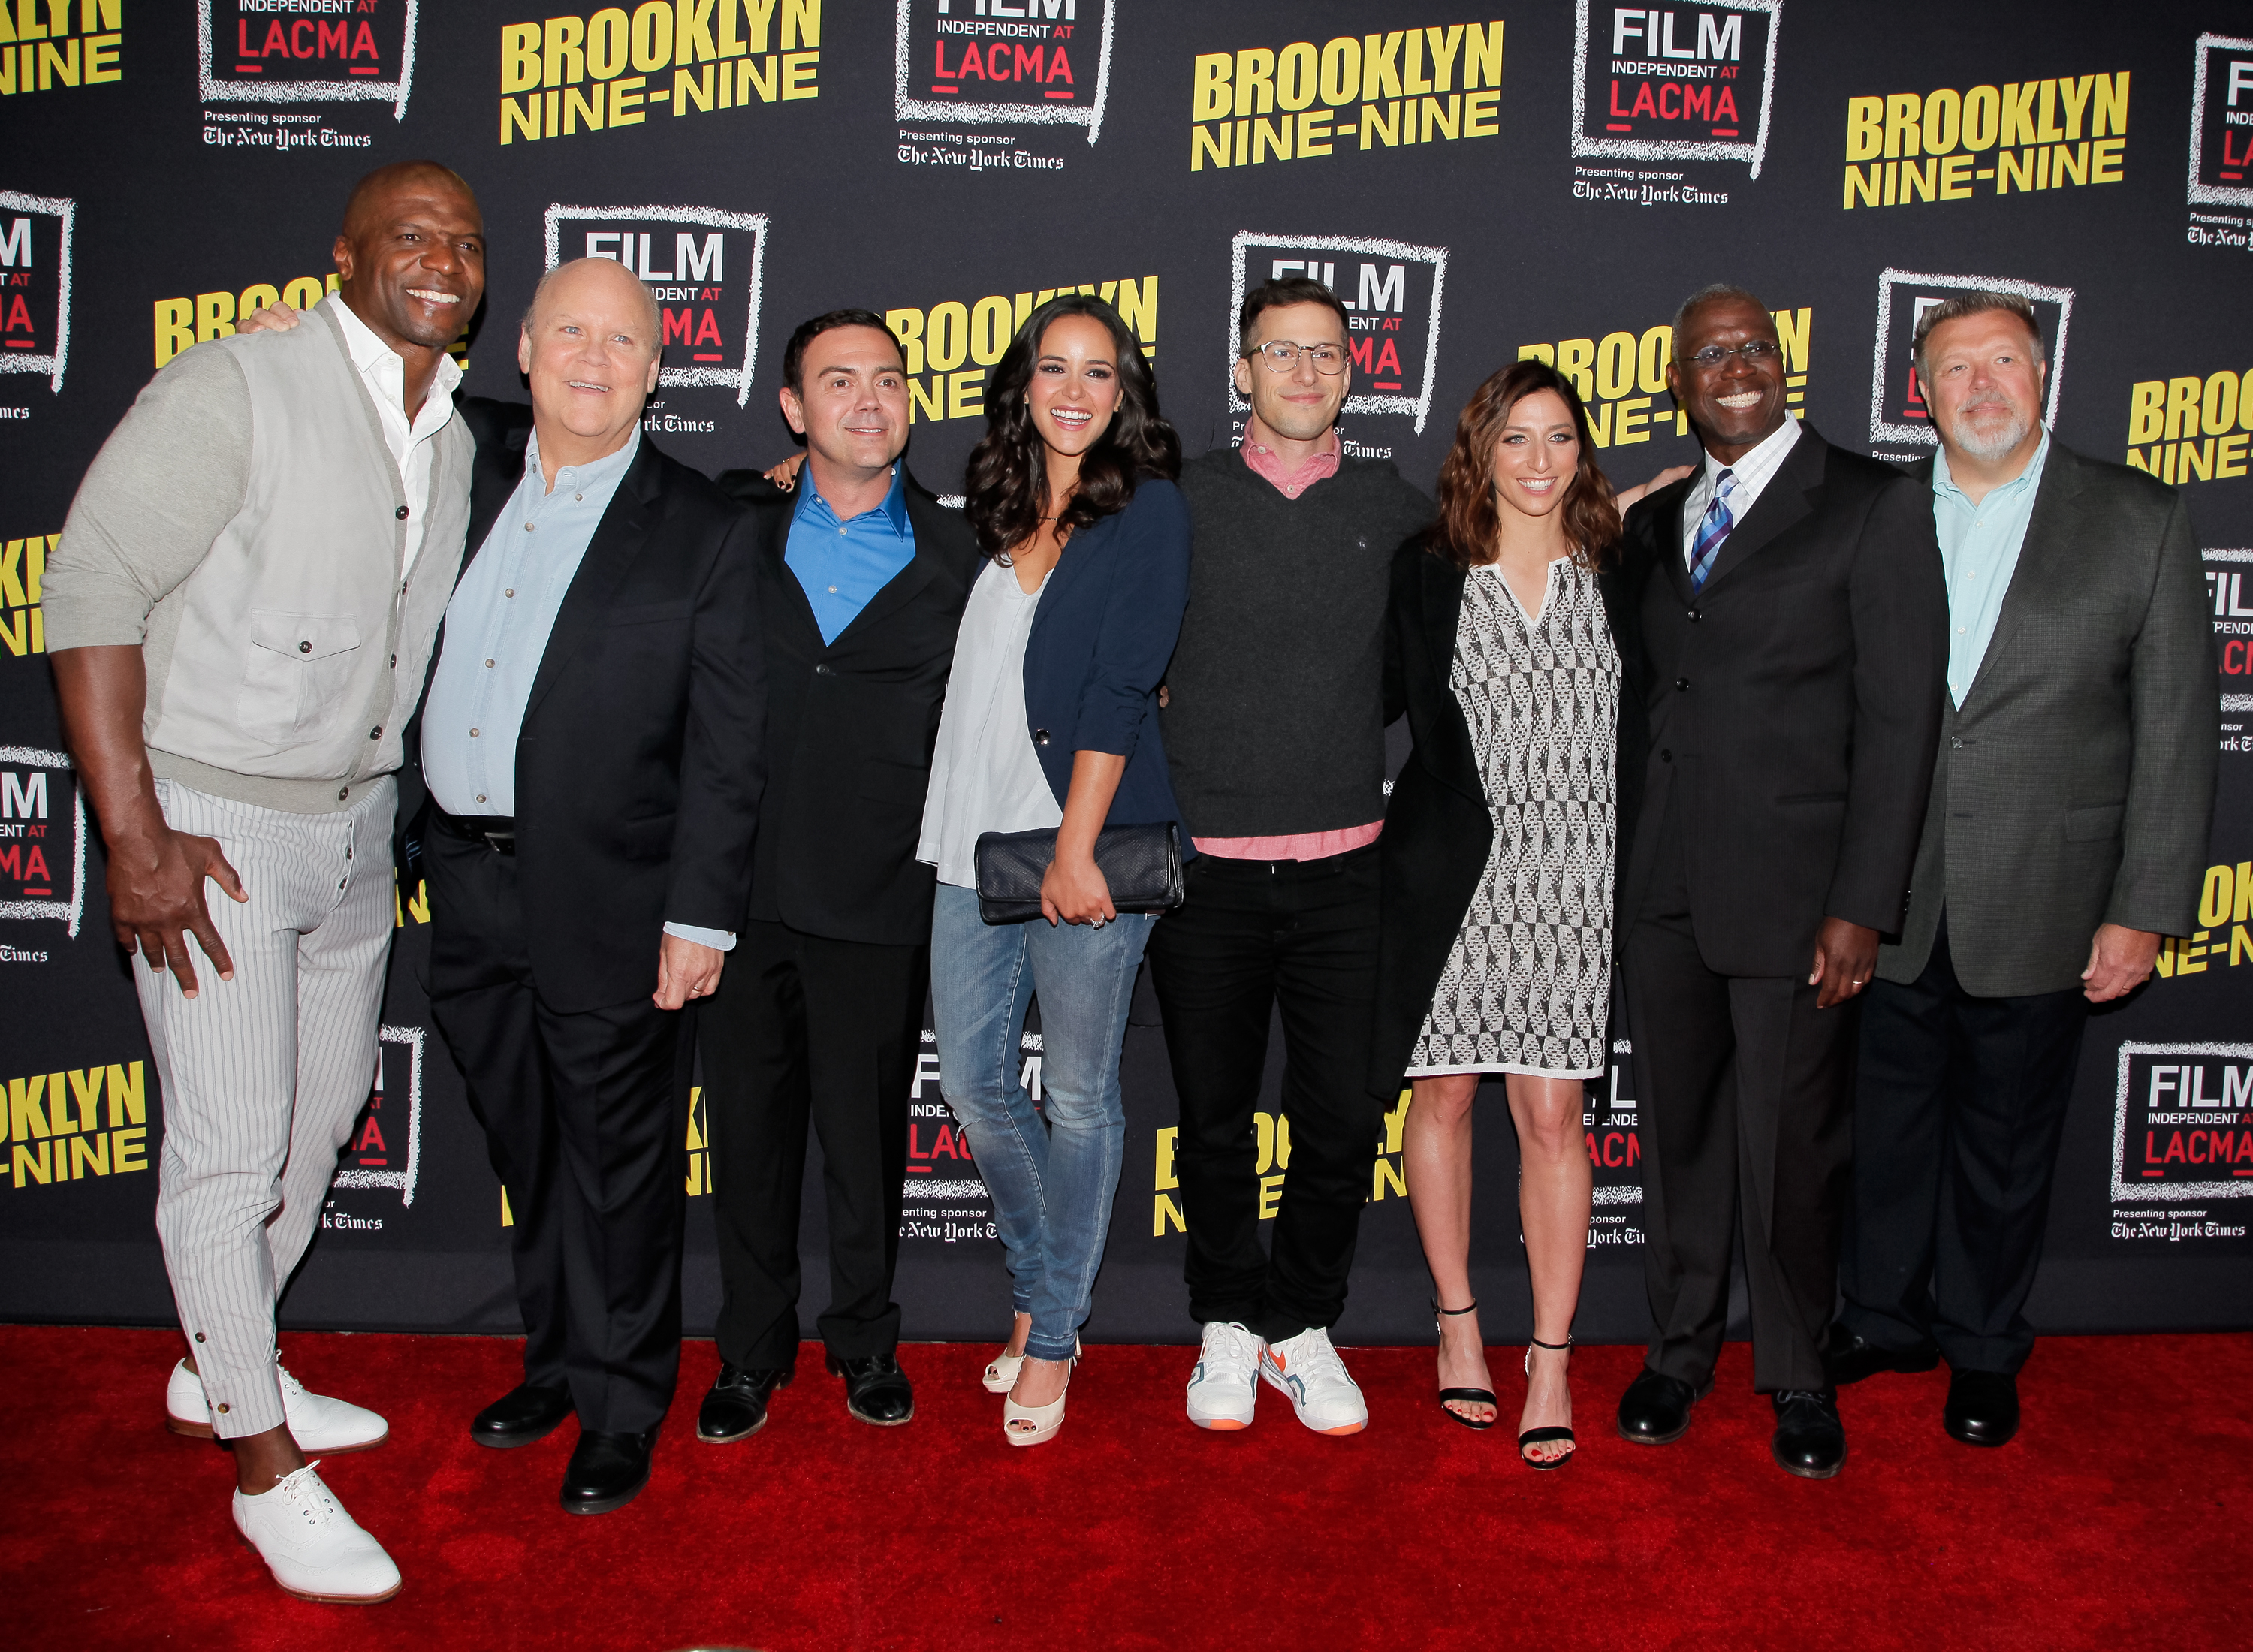 Cast of Brooklyn Nine-Nine standing together at an event in smart casual attire